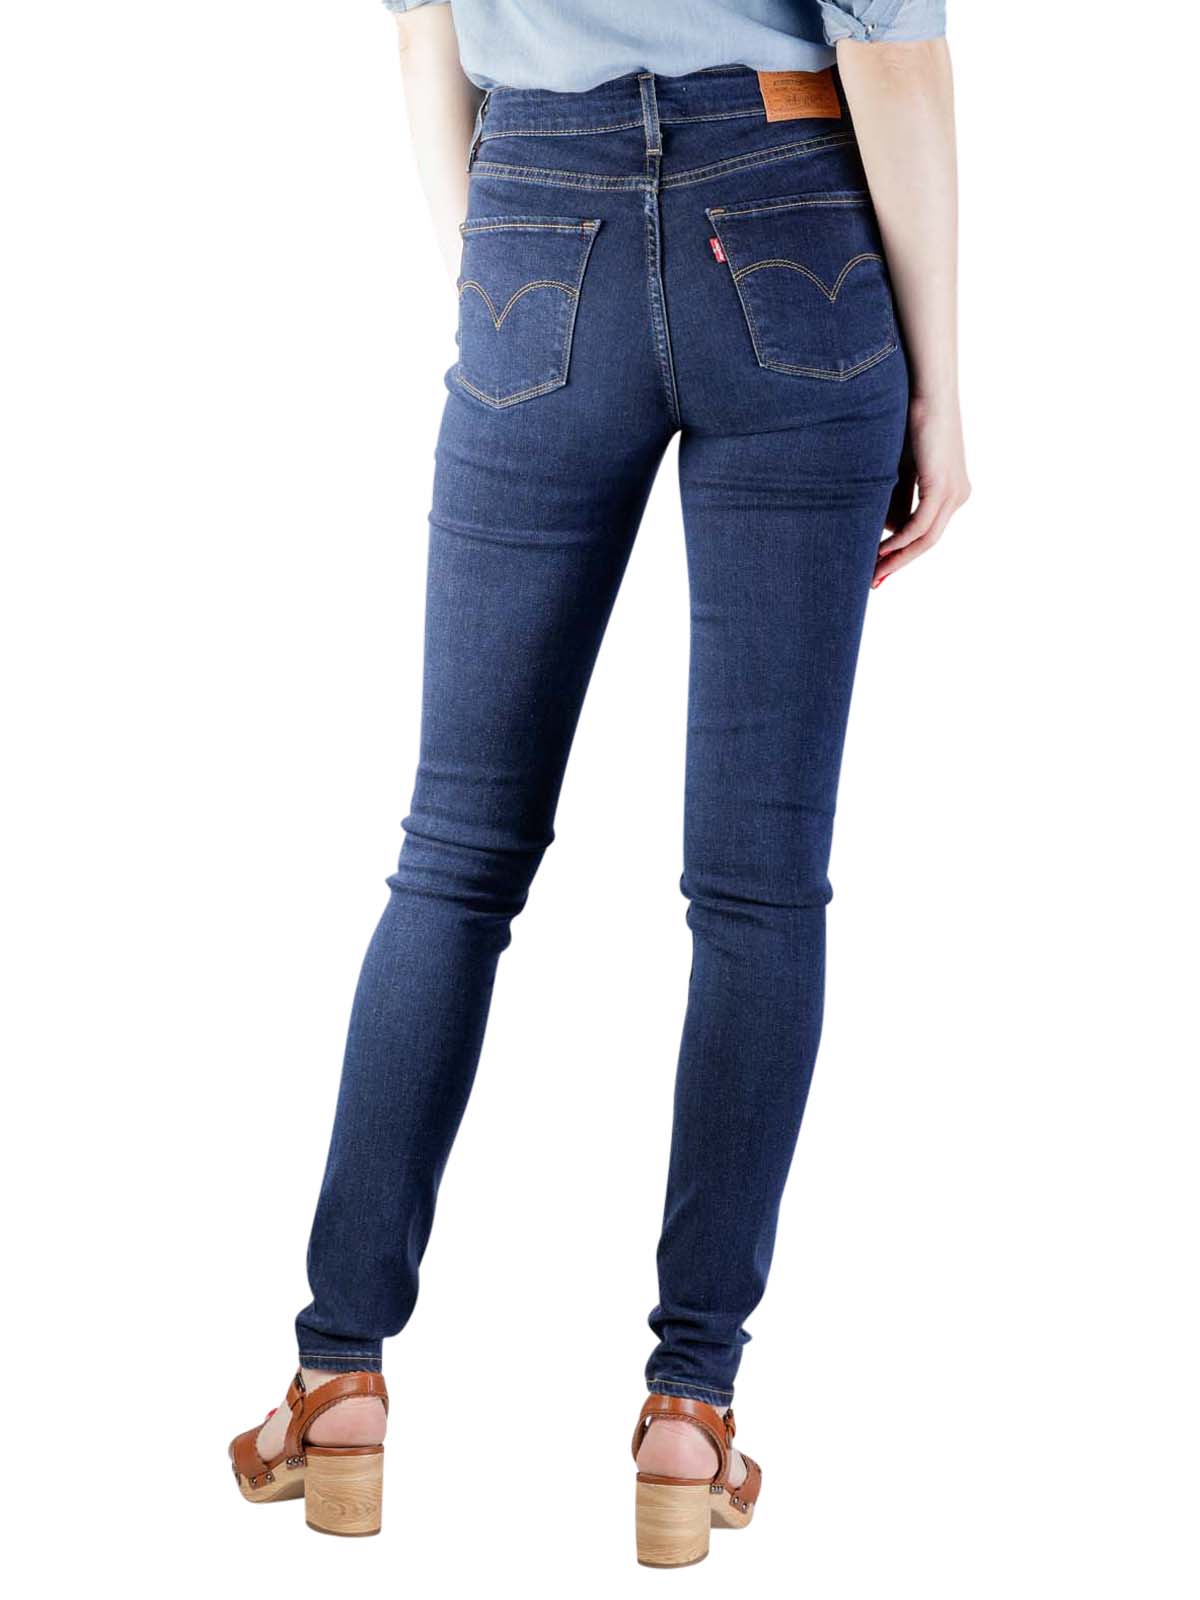 Levi's 721 High Rise Skinny Jeans bogota feels Levi's Women's Jeans | Free  Shipping on  - SIMPLY LOOK GOOD